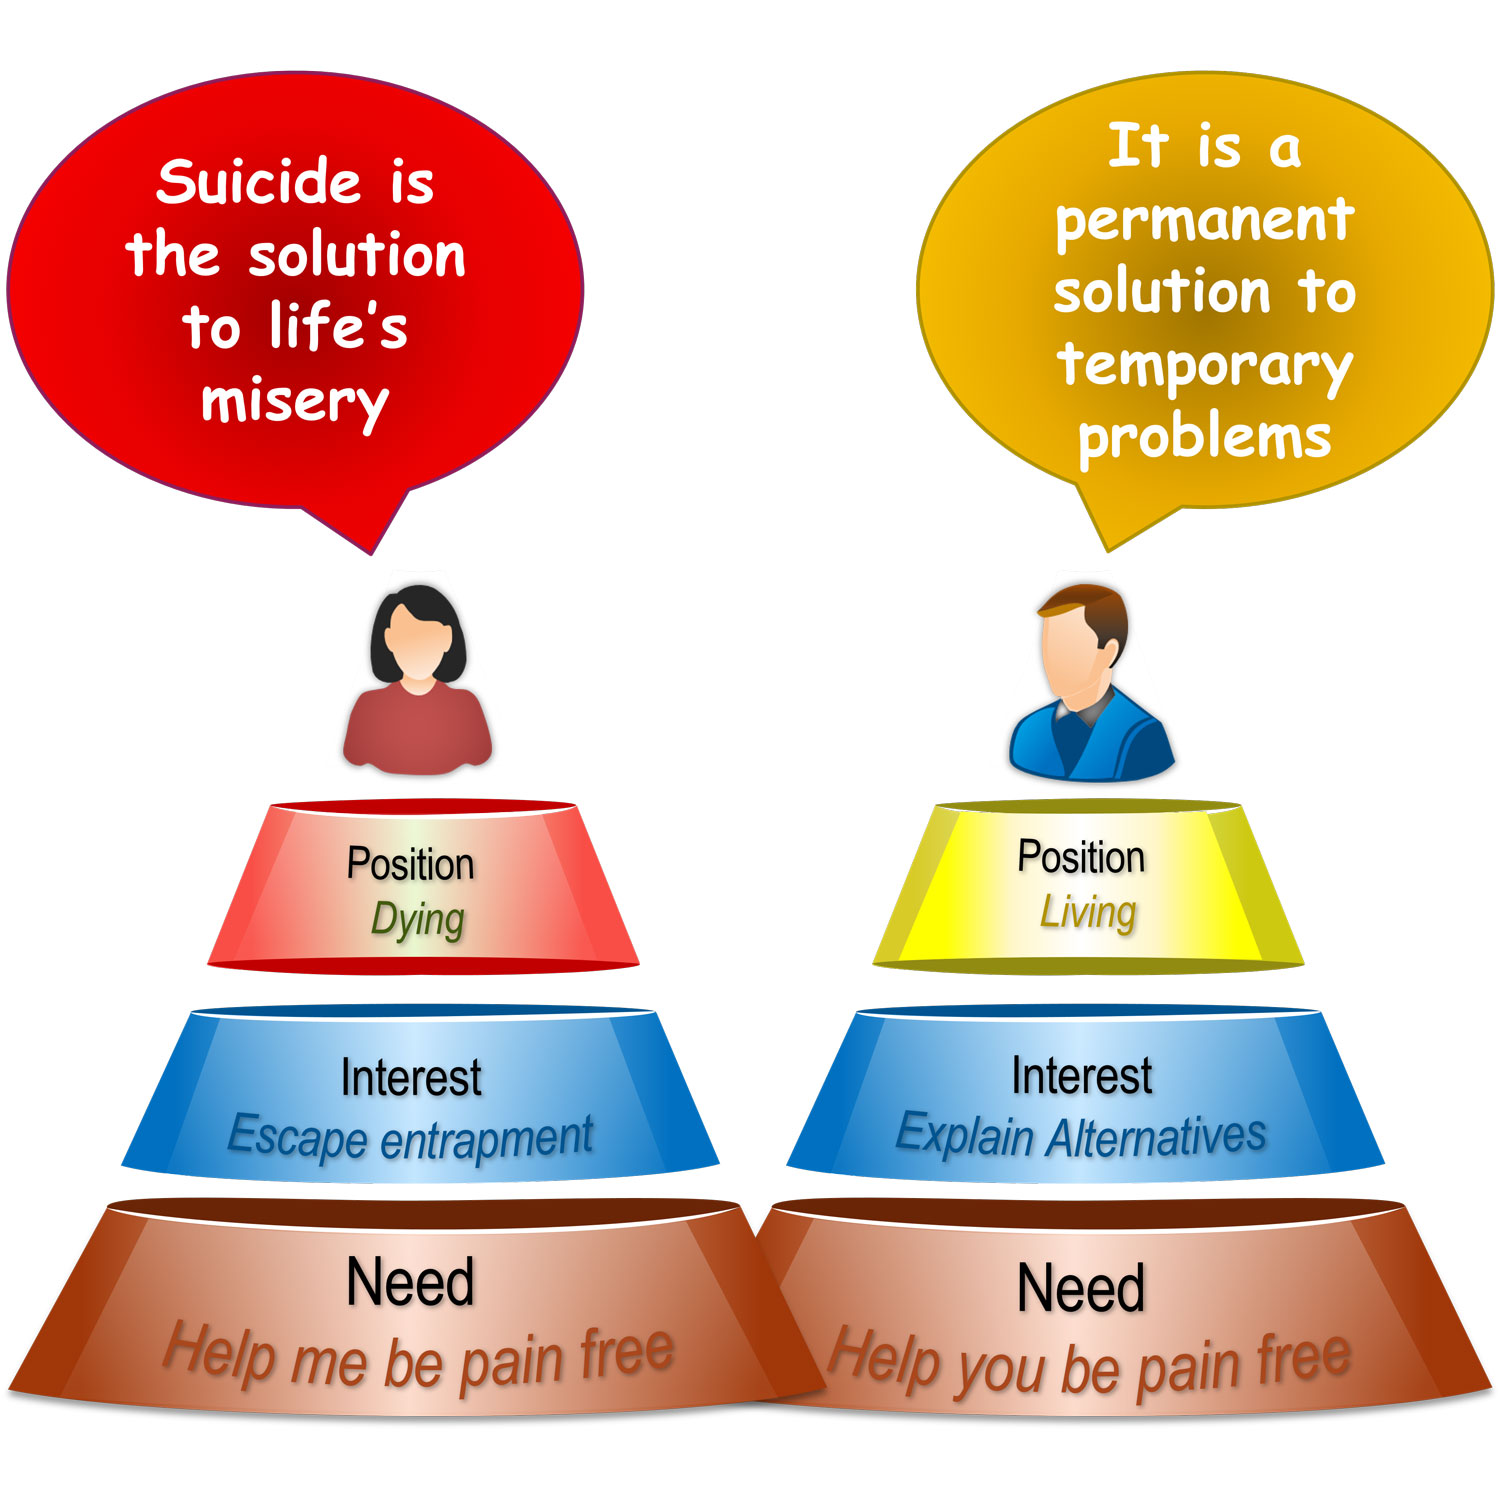 Position, Interests, Needs - way of finding common ground in suicidal distress